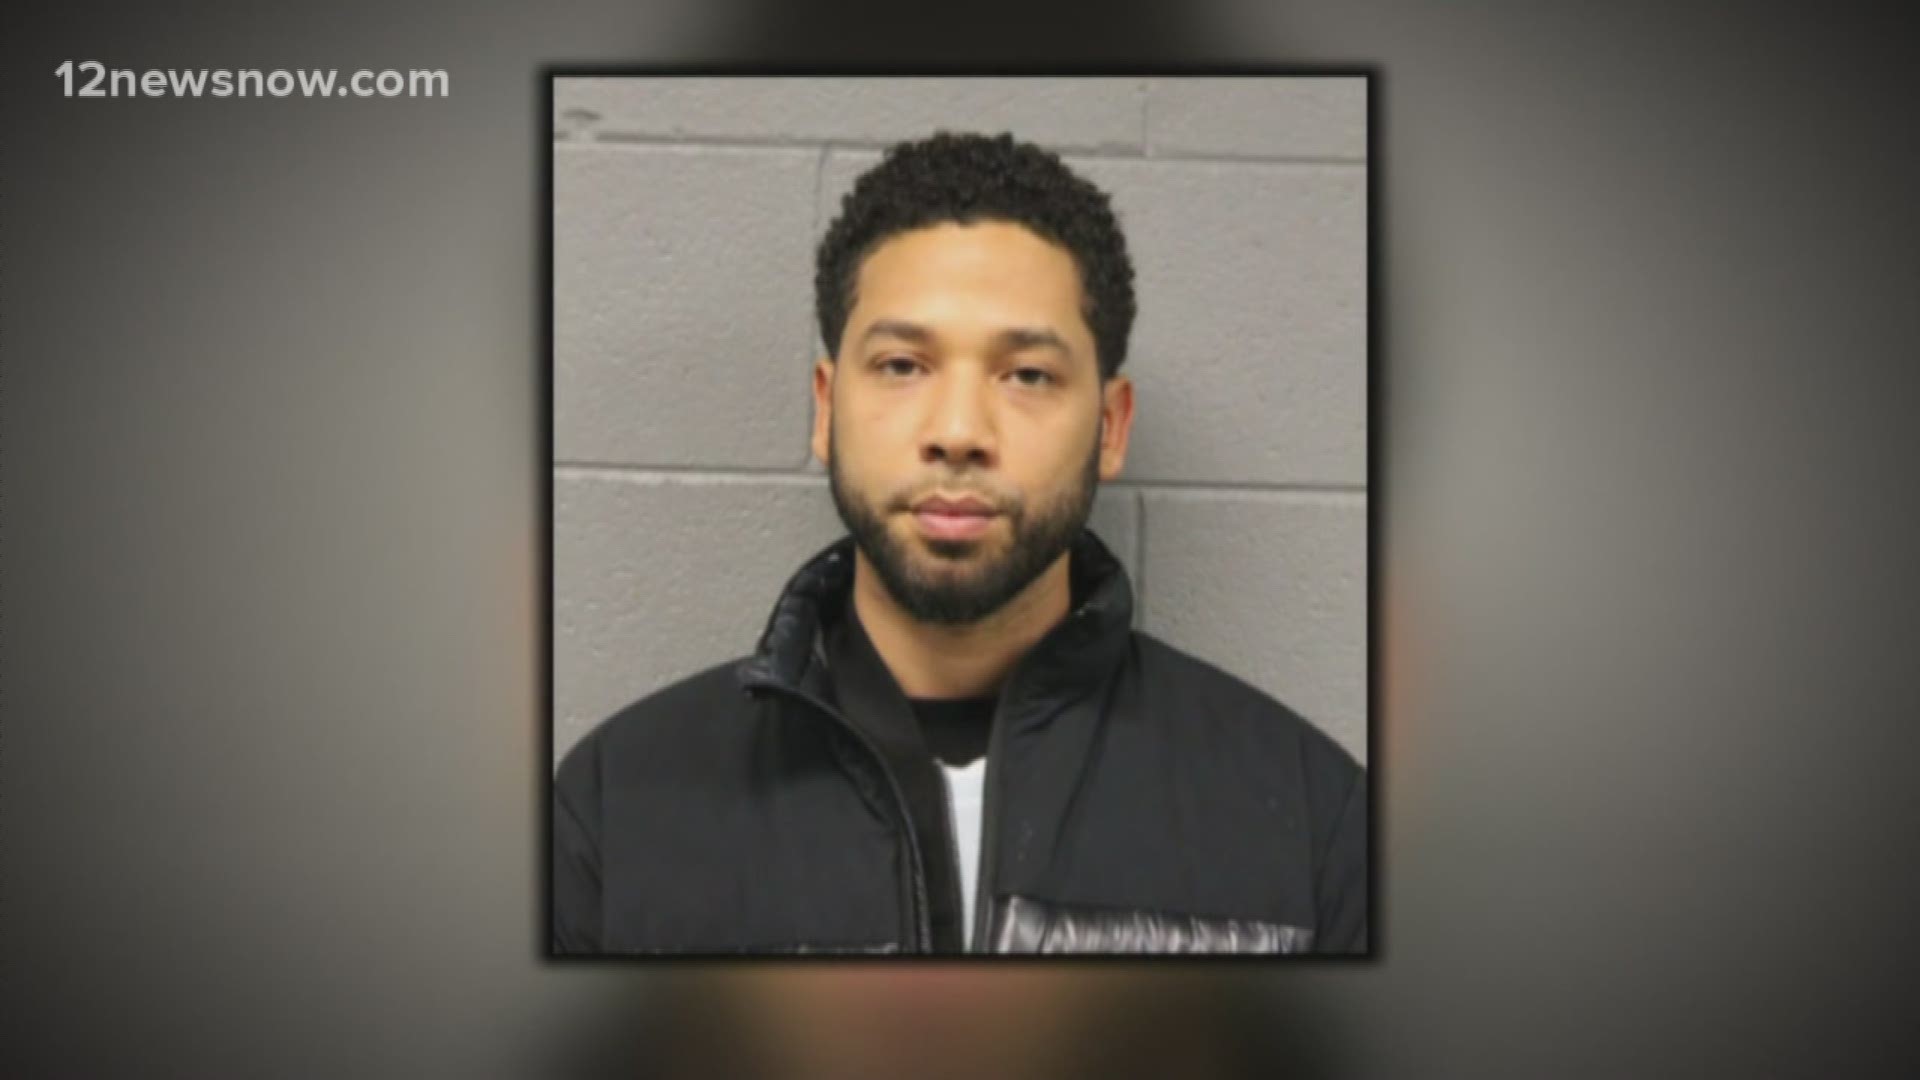 Jussie Smollett's character to be removed from 'Empire' for end of season